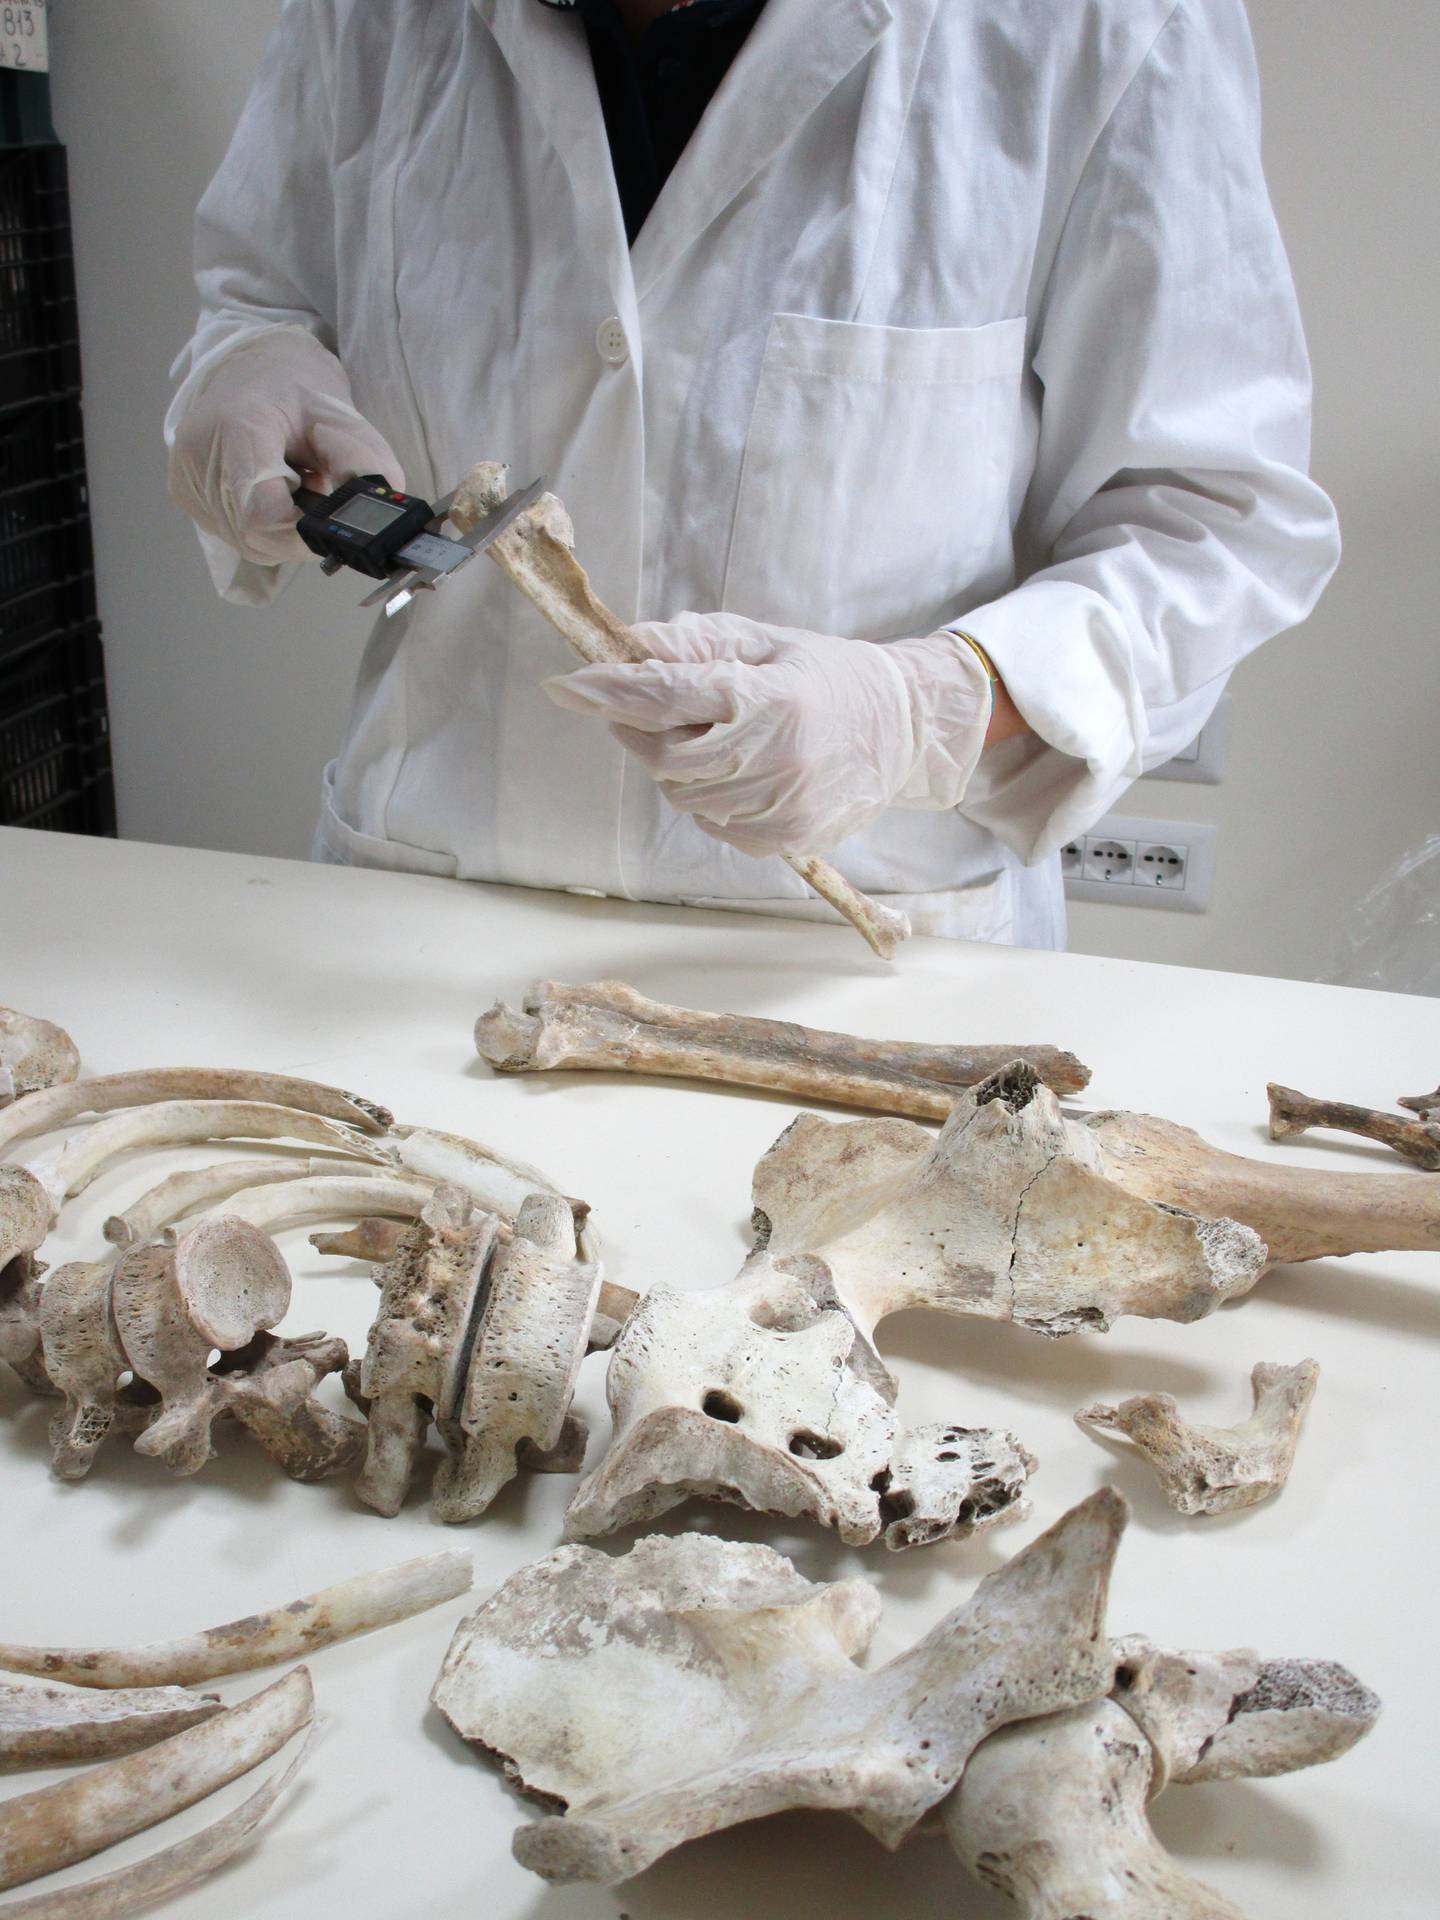 Doctor Serena Viva who is studying one of the skeletons from Pompeii.